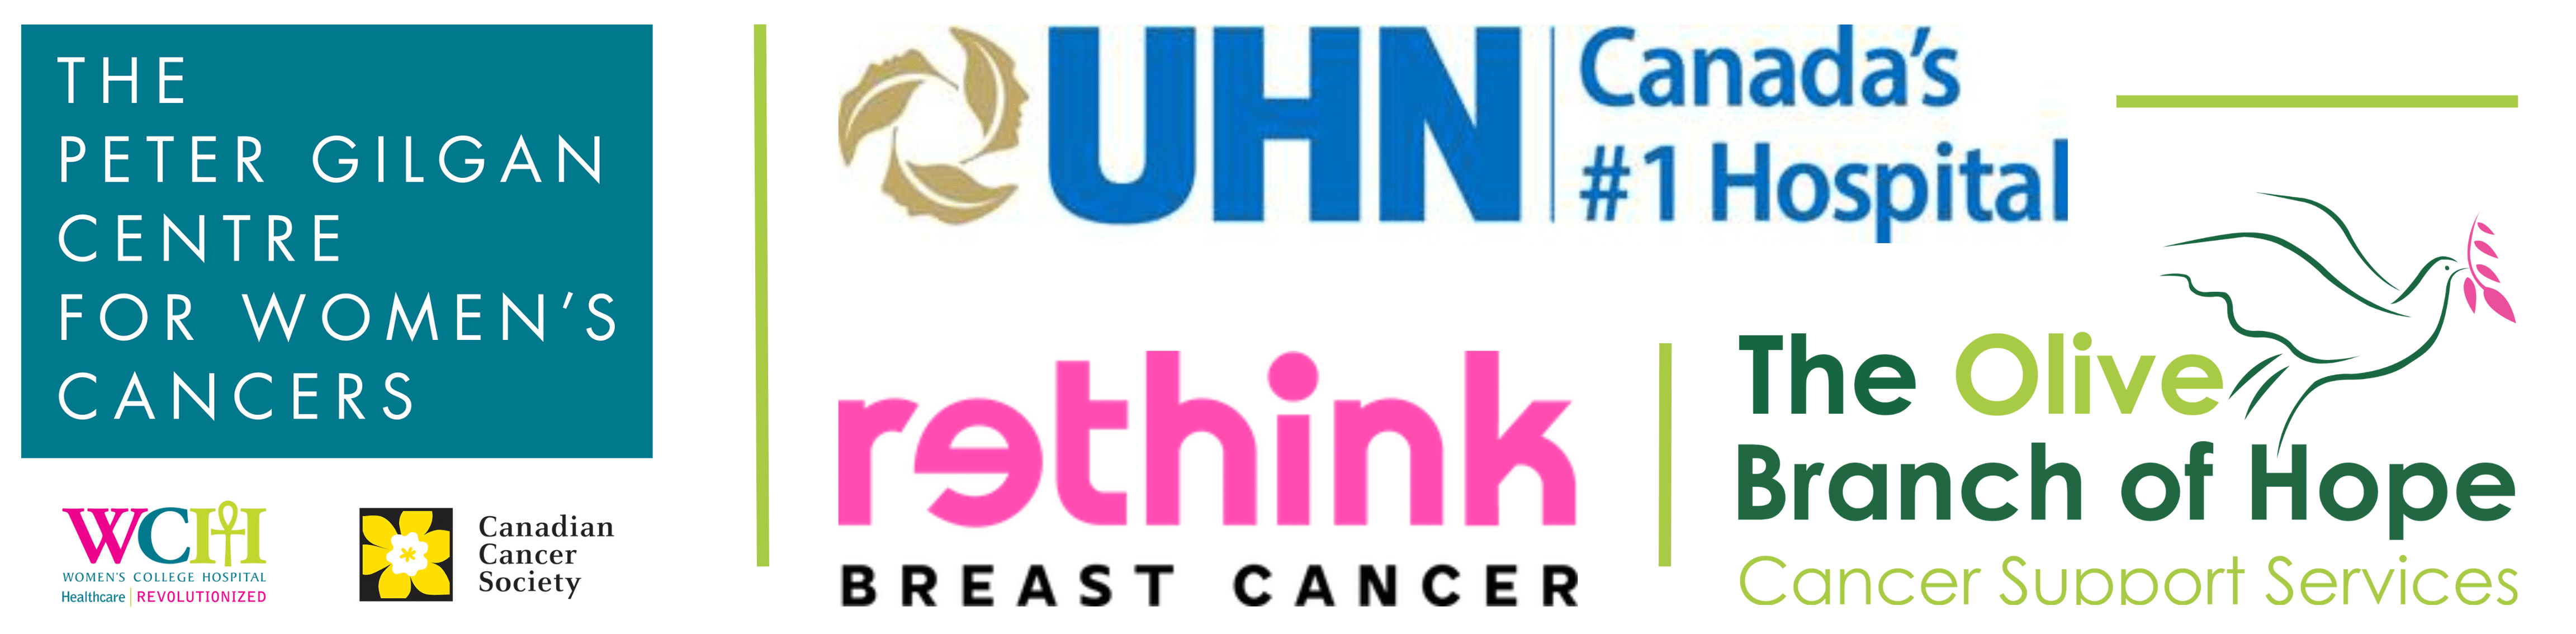 The Peter Gilgan Centre for Women’s Cancers, Women’s College Hospital, Canadian Cancer Society, the Universal Health Network, The Olive Branch of Hope and ReThink Breast Cancer logos.